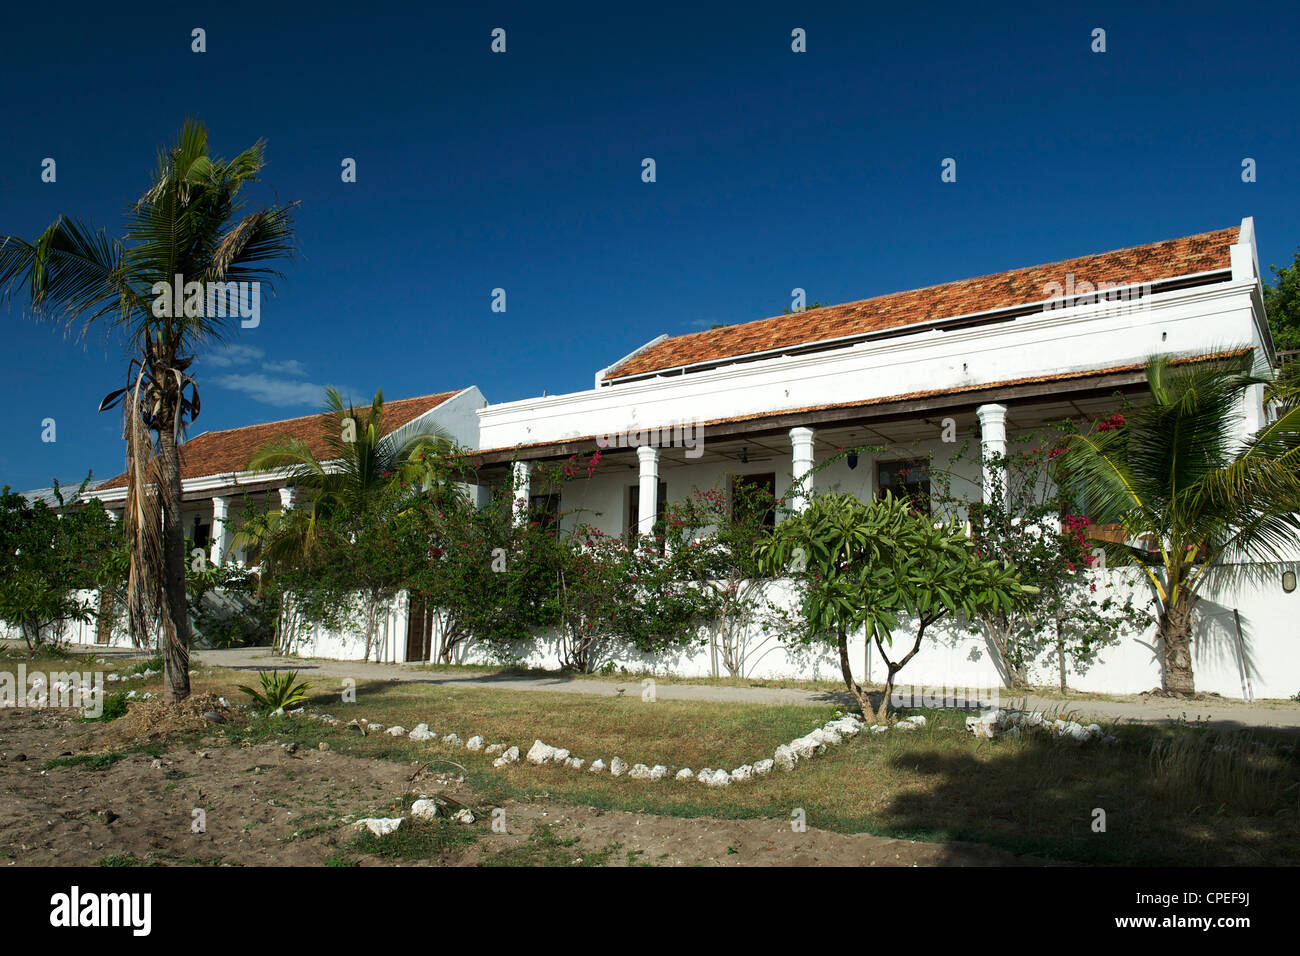 Ibo lodge on Ibo island in the Quirimbas archipelago off the coast of northern Mozambique. Stock Photo